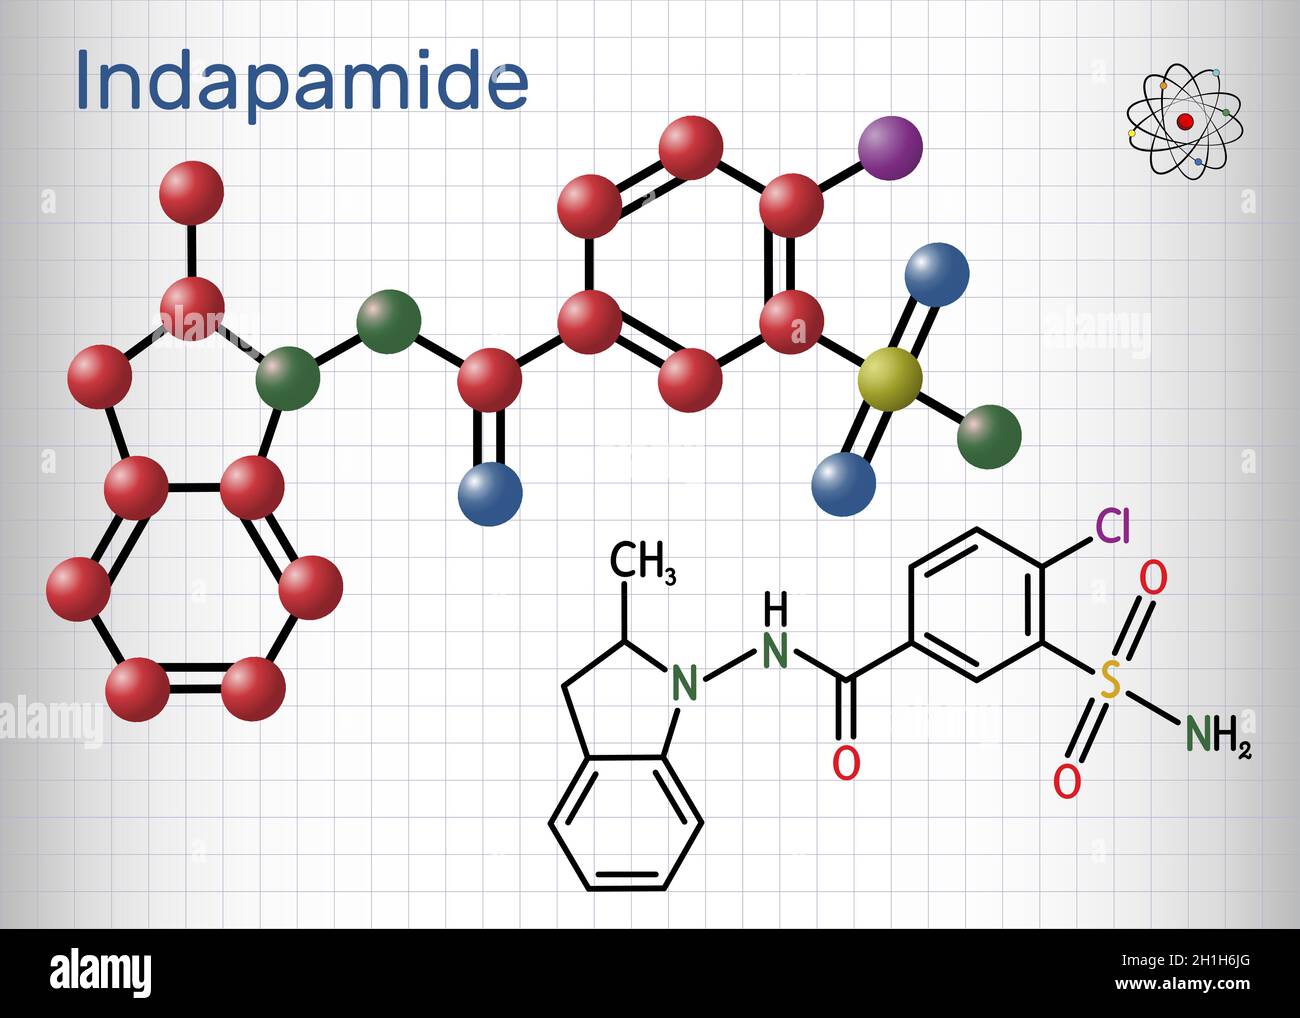 Indapamide molecule. It is thiazide-like diuretic, hypertension drug. Structural chemical formula and molecule model. Sheet of paper in a cage. Vector Stock Vector